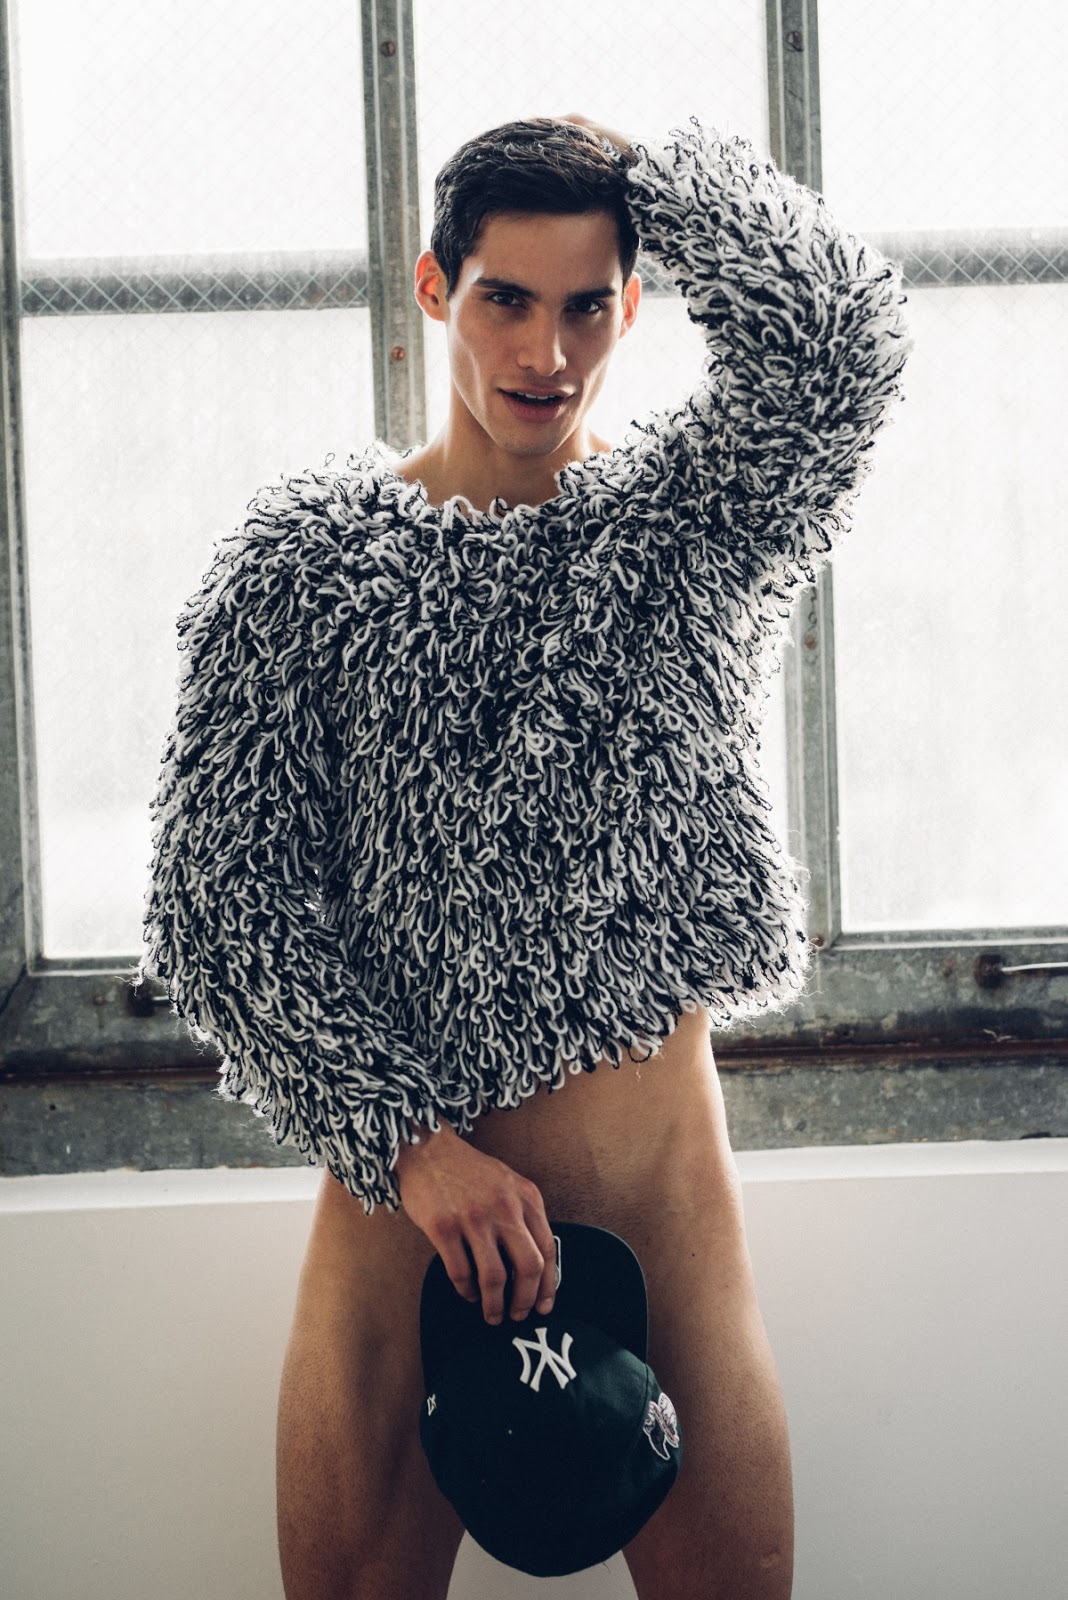 Exclusive Marvin Cortes by Taylor Miller.